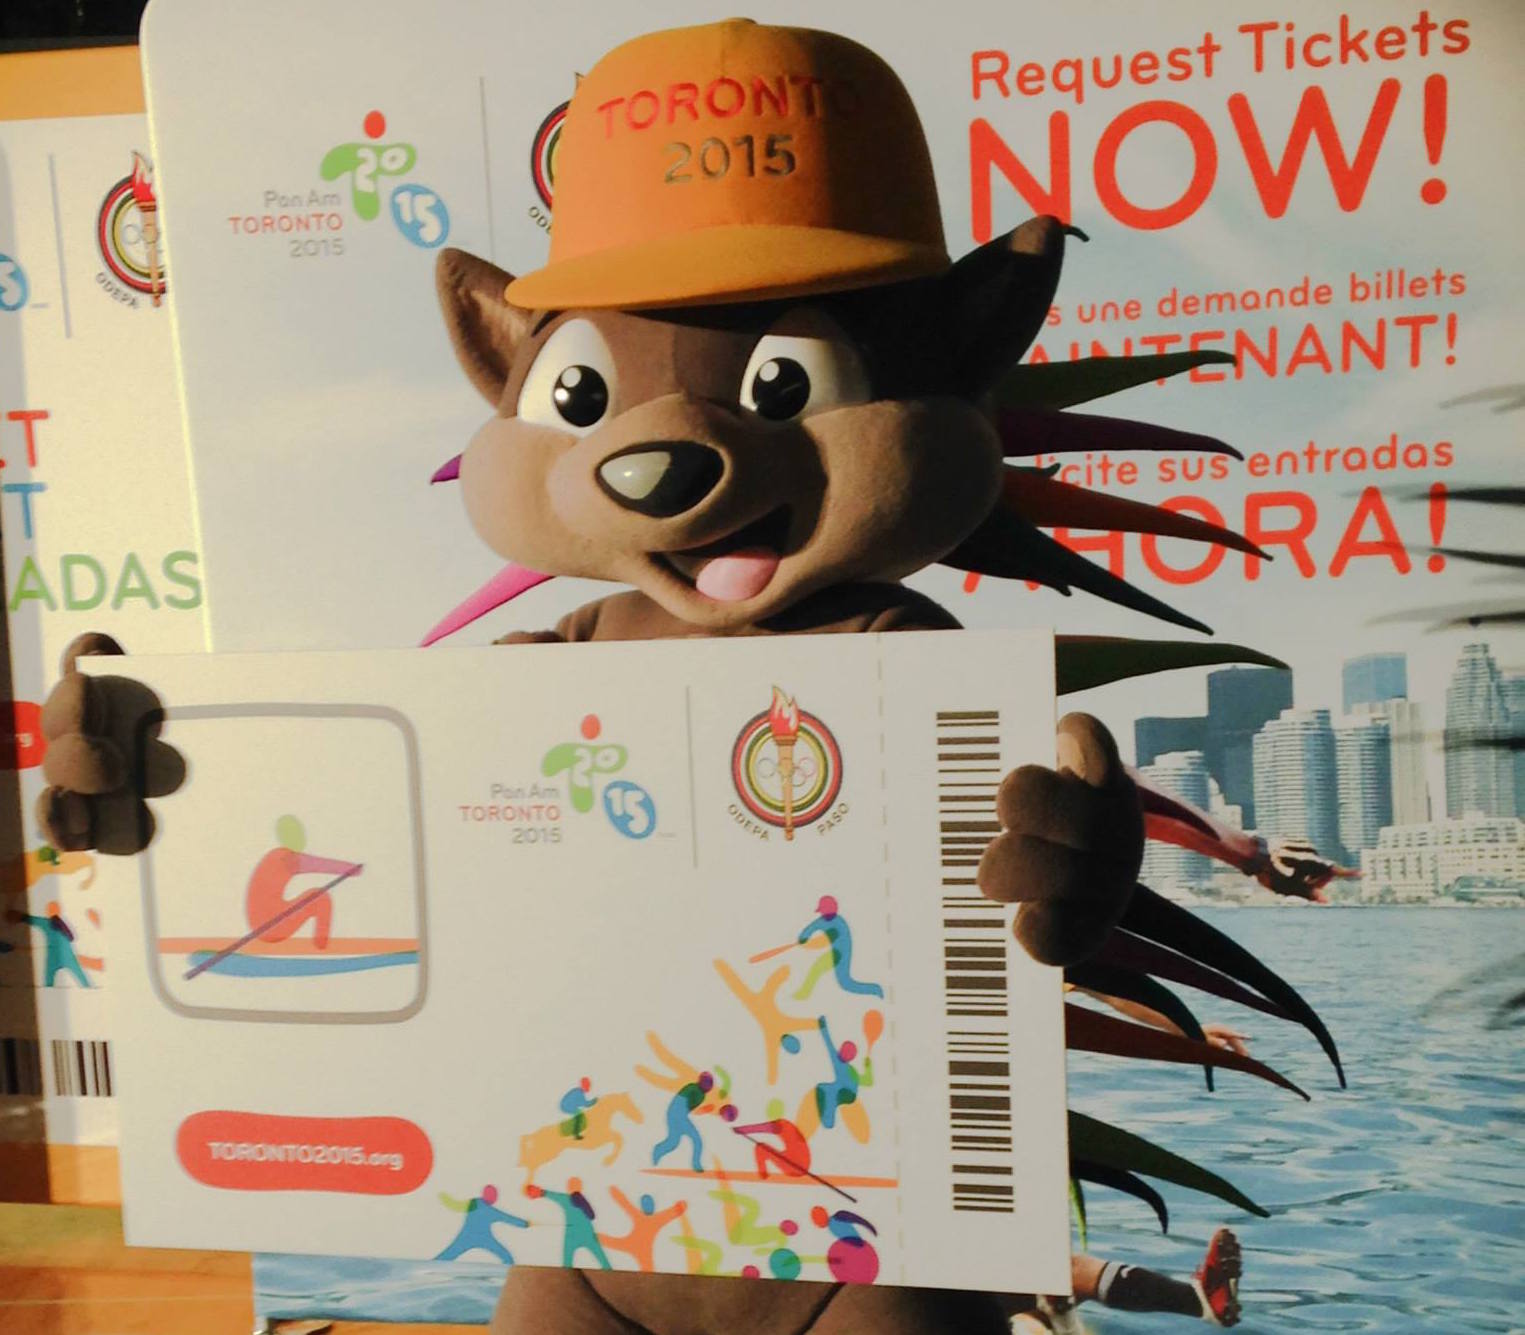 Tickets for the Toronto 2015 Pan American Games are going fast ©Toronto 2015/Facebook